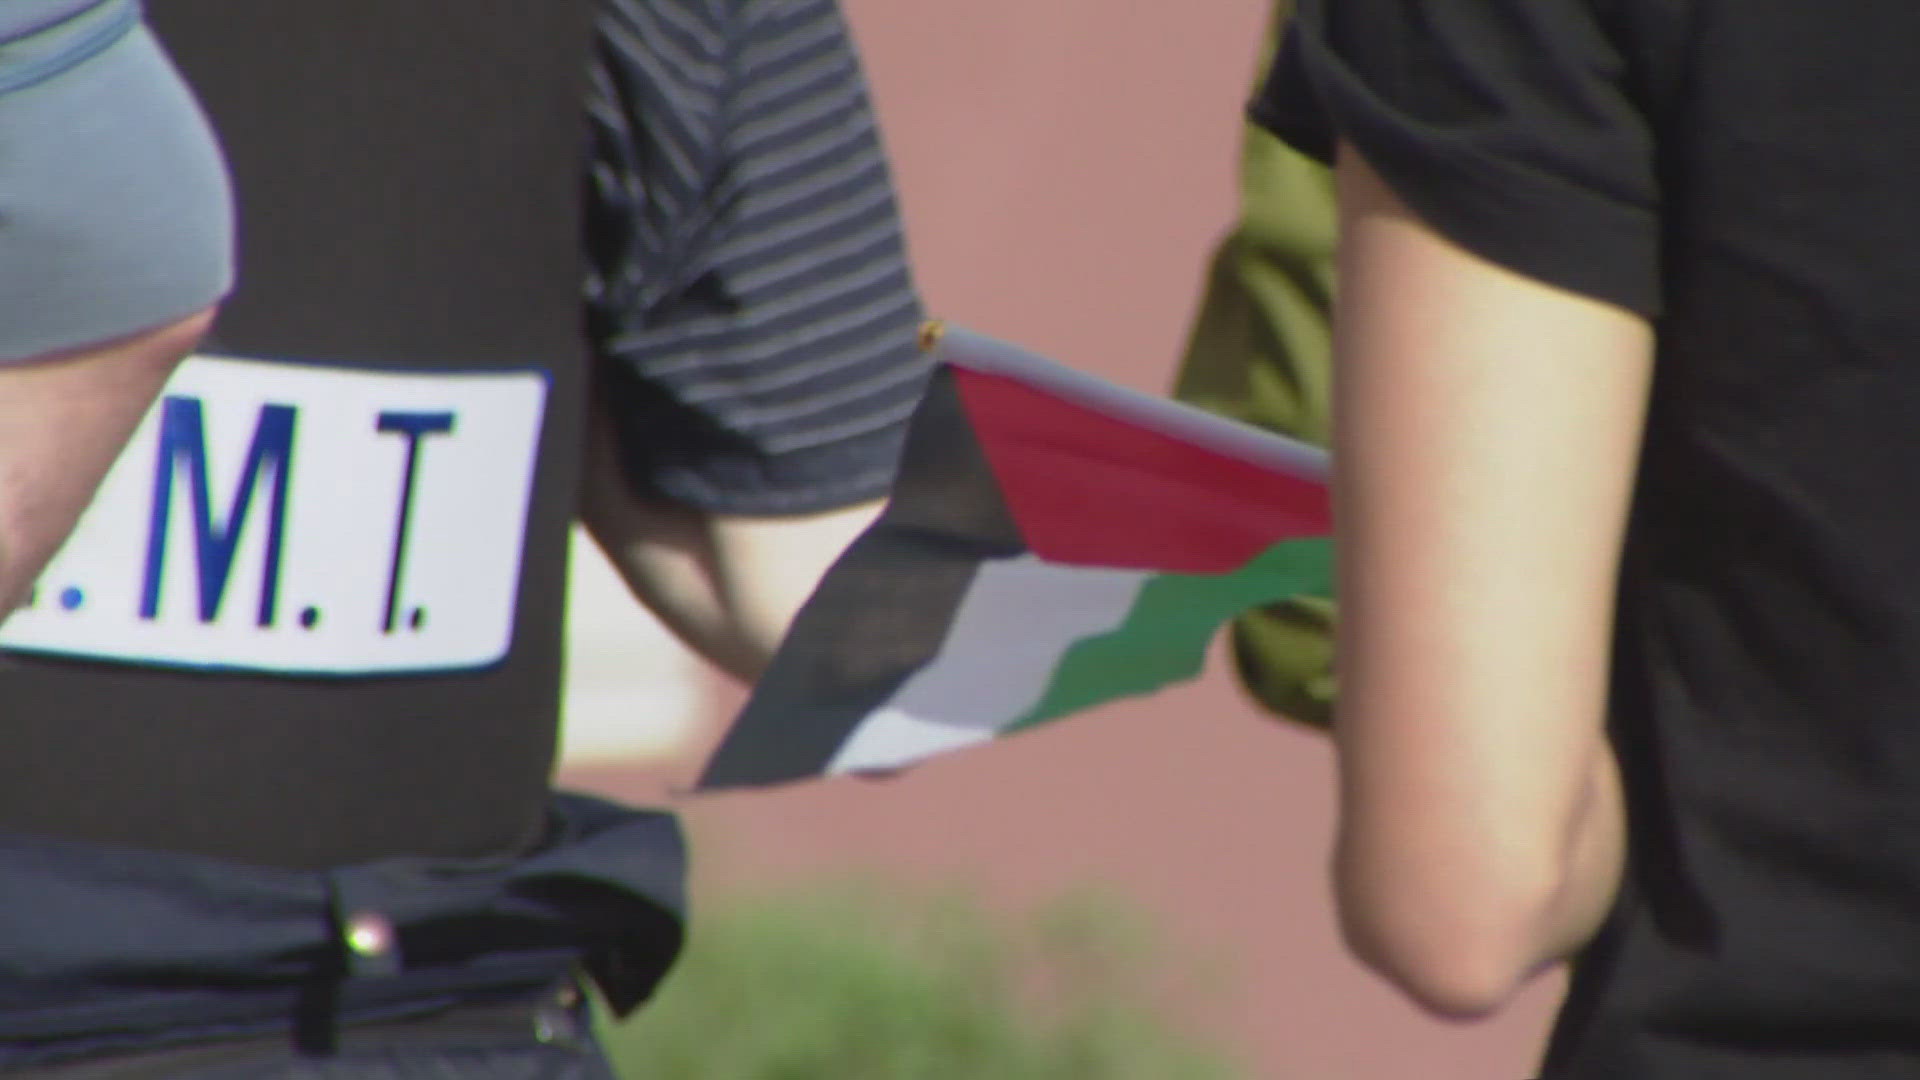 The pro-Palestinian protest encampment has been on Auraria Campus' Tivoli Quad for three weeks.